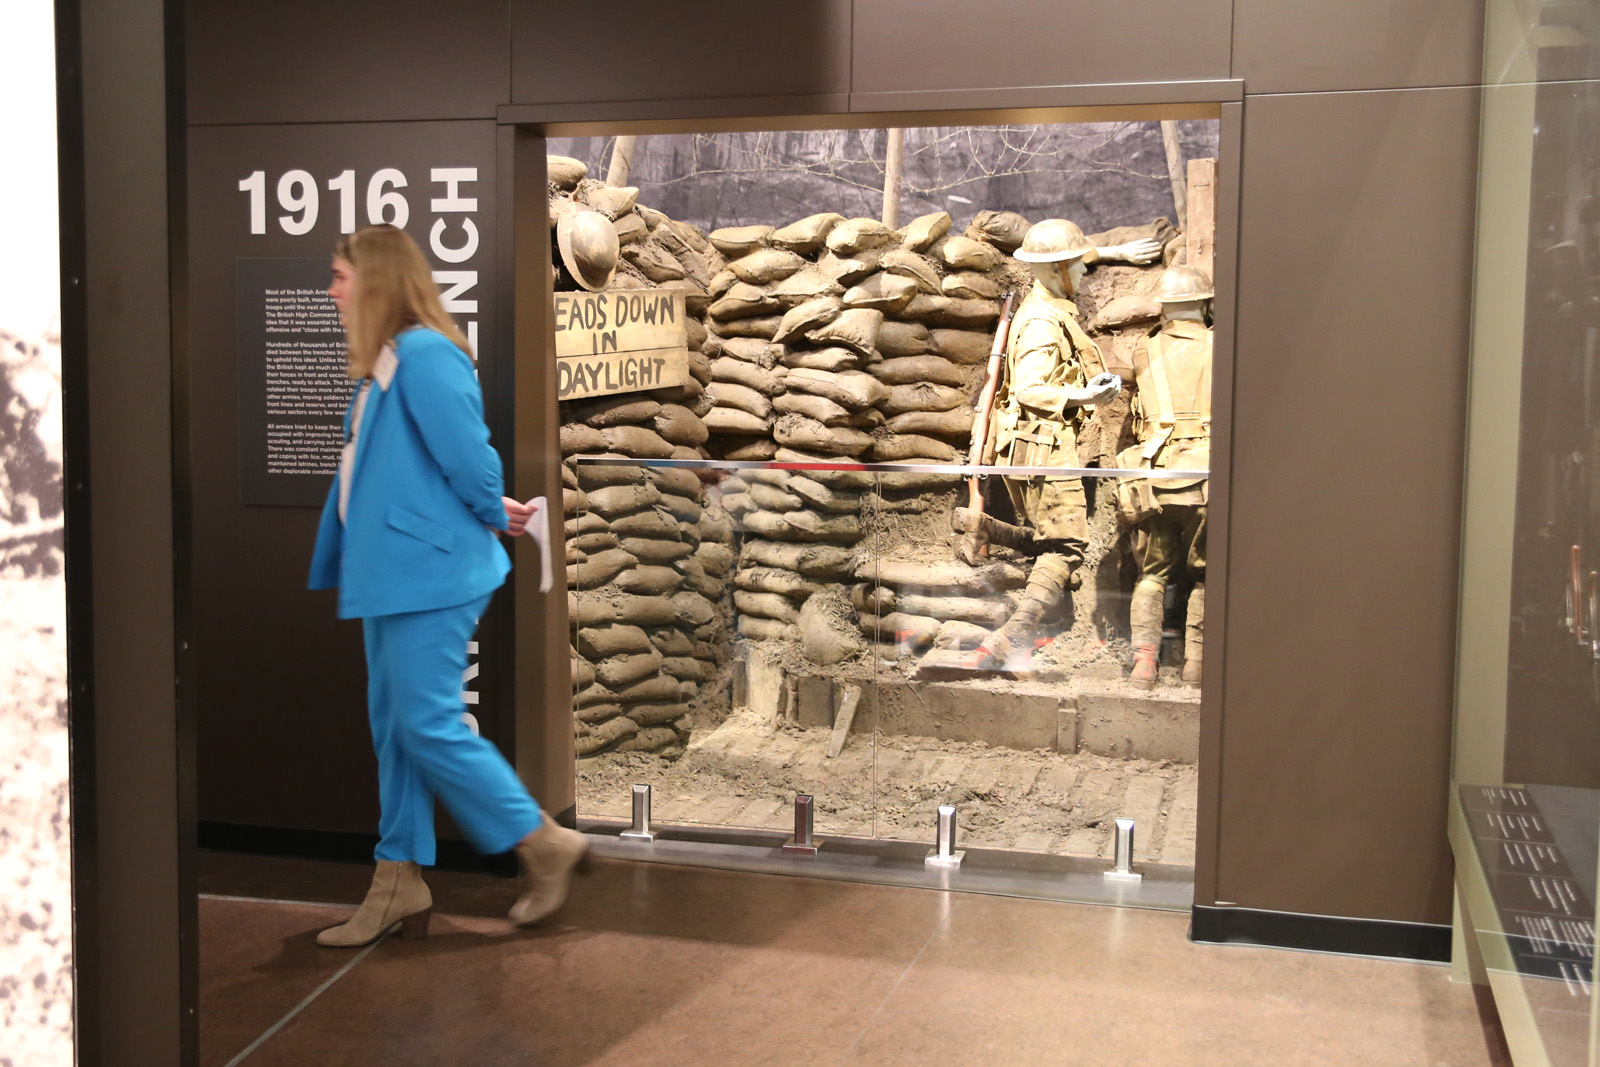 Modern photograph of a large opening in a museum exhibit that leads to a life-size cutaway model of a WWI trench. A young white person wearing a blue suit is walking away from the exhibit.